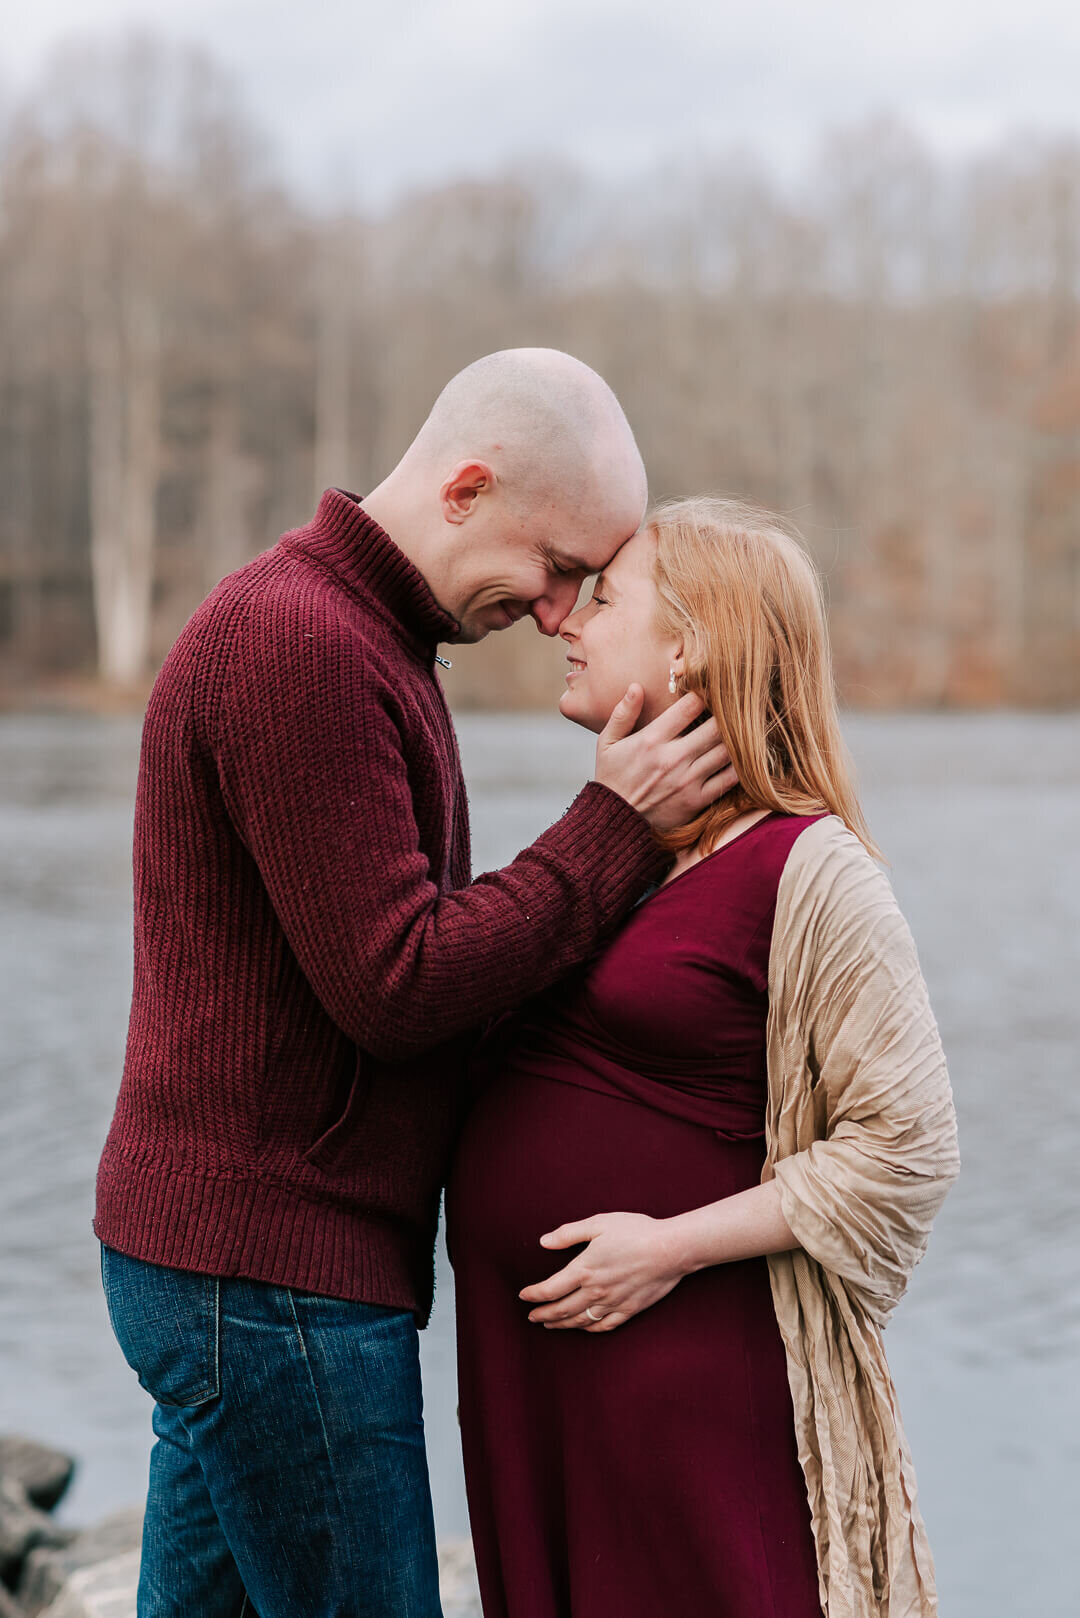 A sweet moment captured by Denise Van Photography, a northern virginia maternity photographer